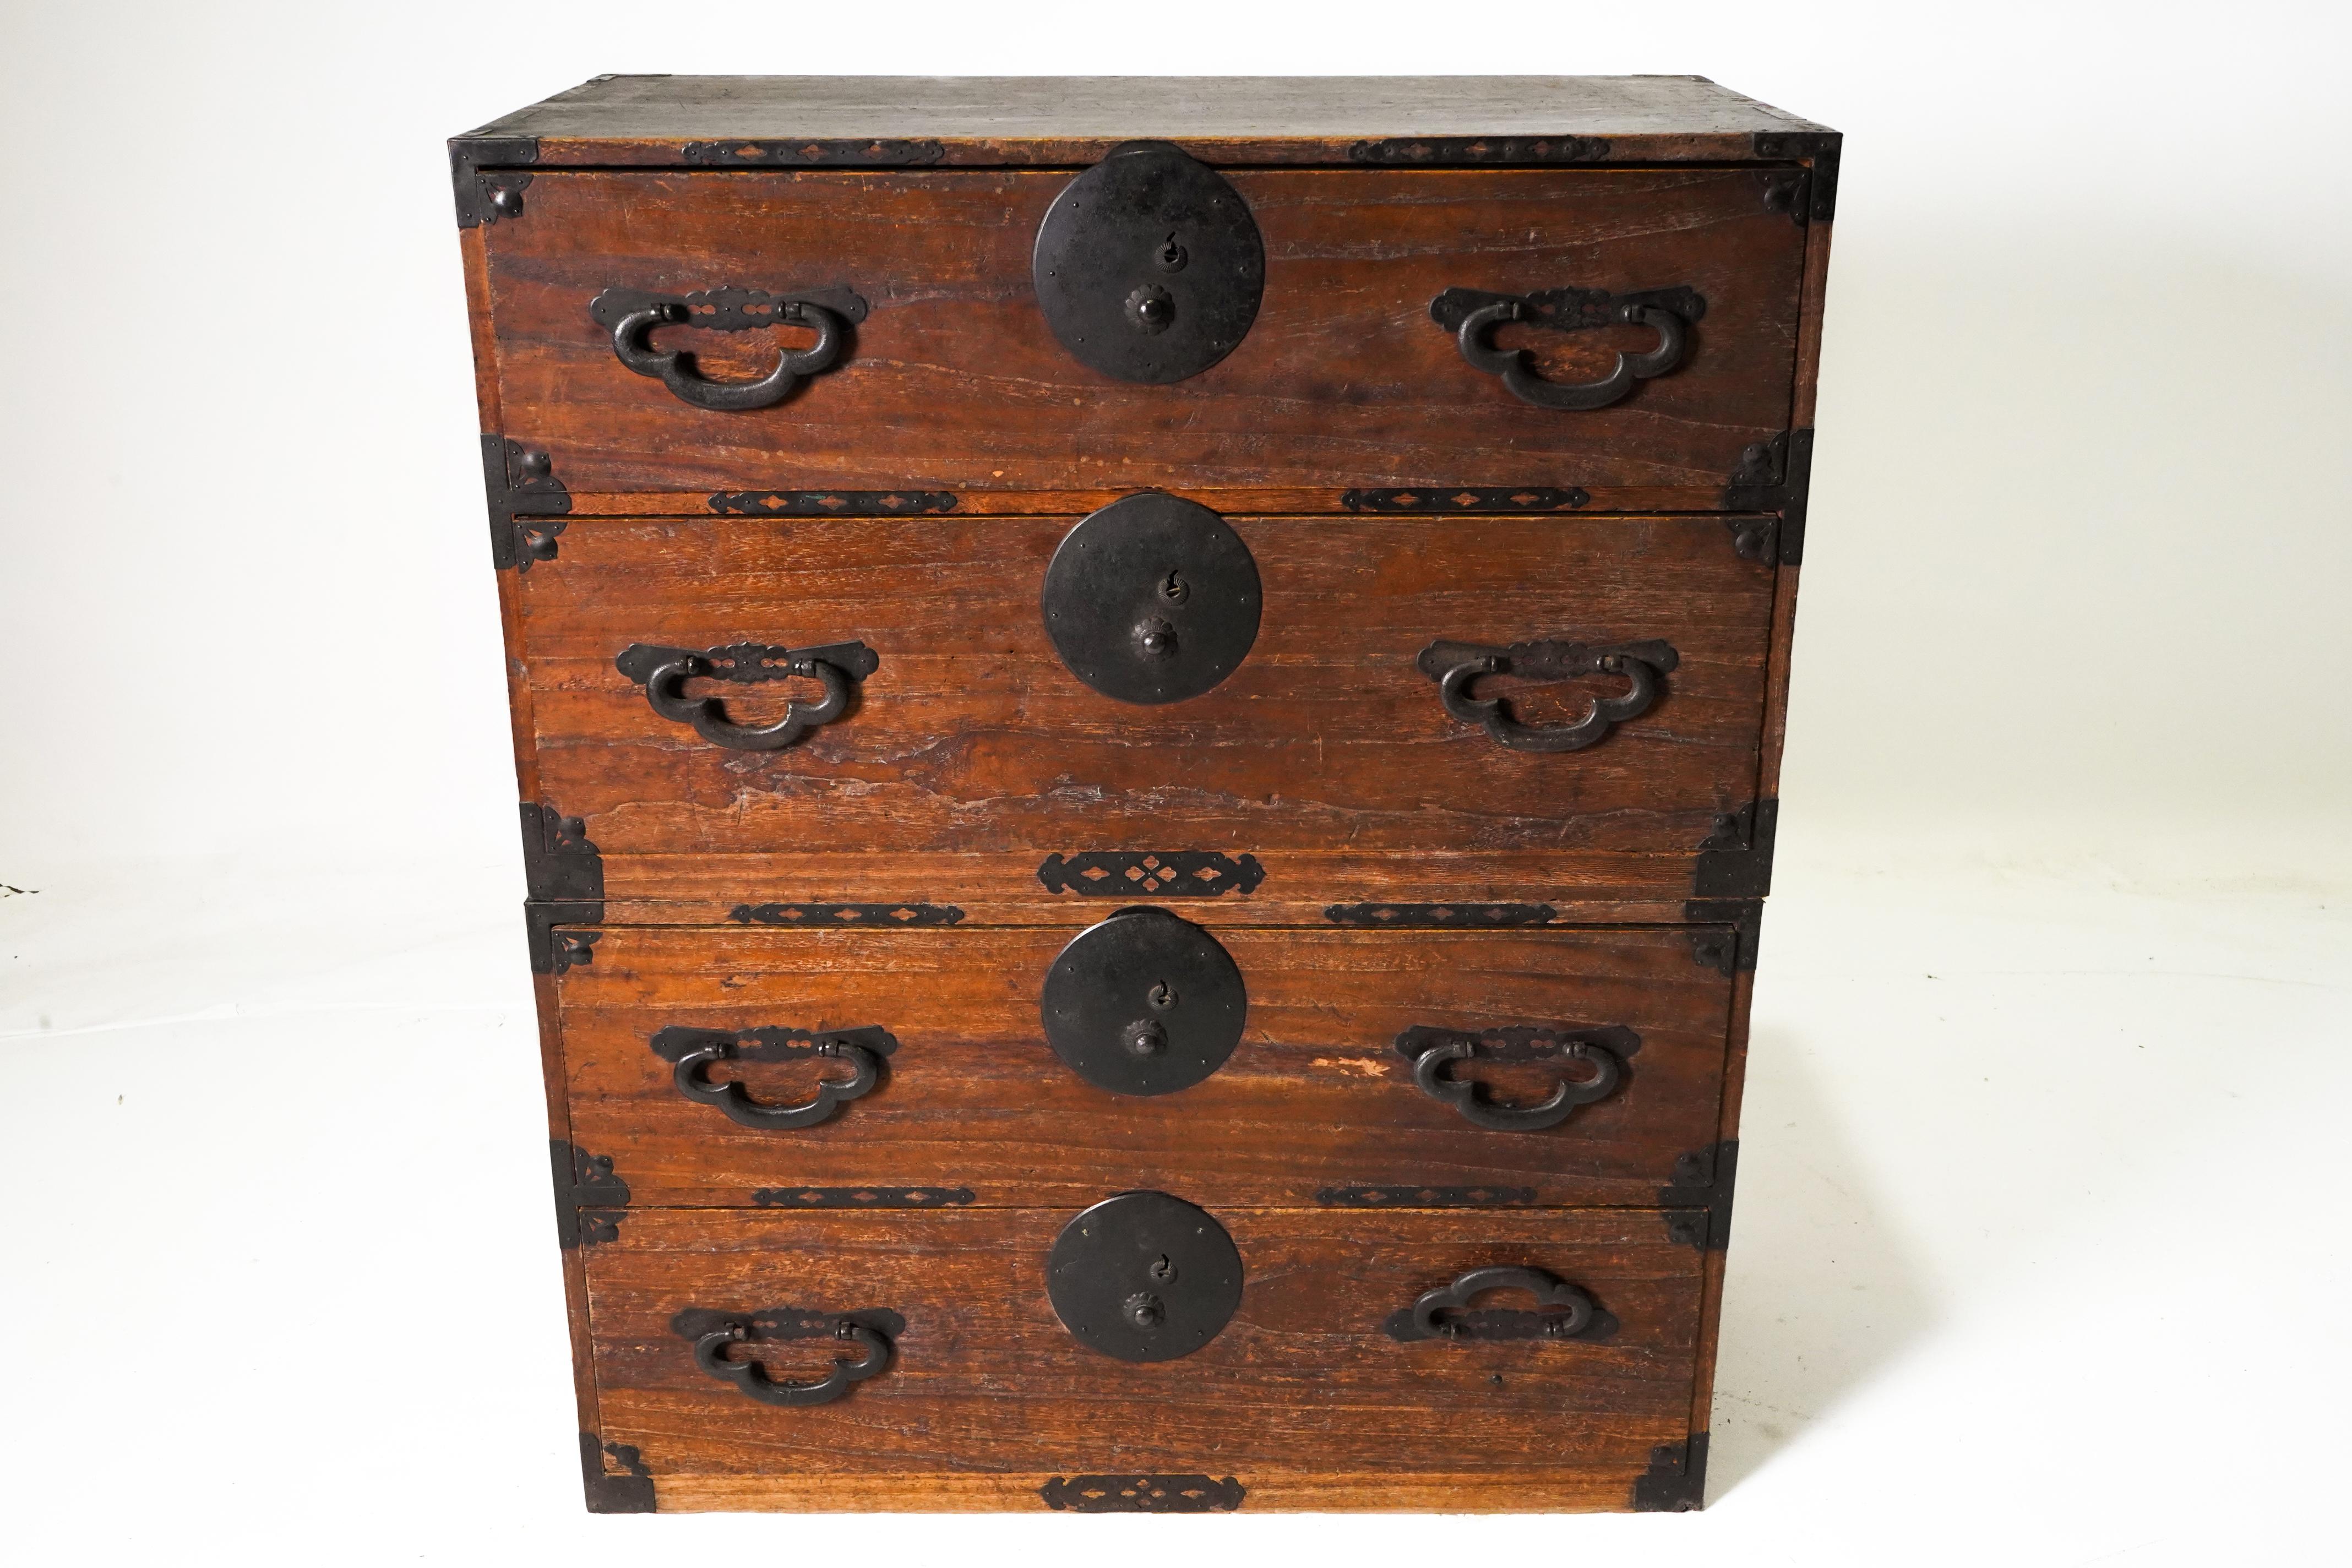 This 2-part antique Japanese tansu has lovely old-patina wood and and attractive hand-forged iron handles and other hardware.  It can be used as-shown, stacked or separated and raised on simple metal stands.  When separated, the two drawer sets make